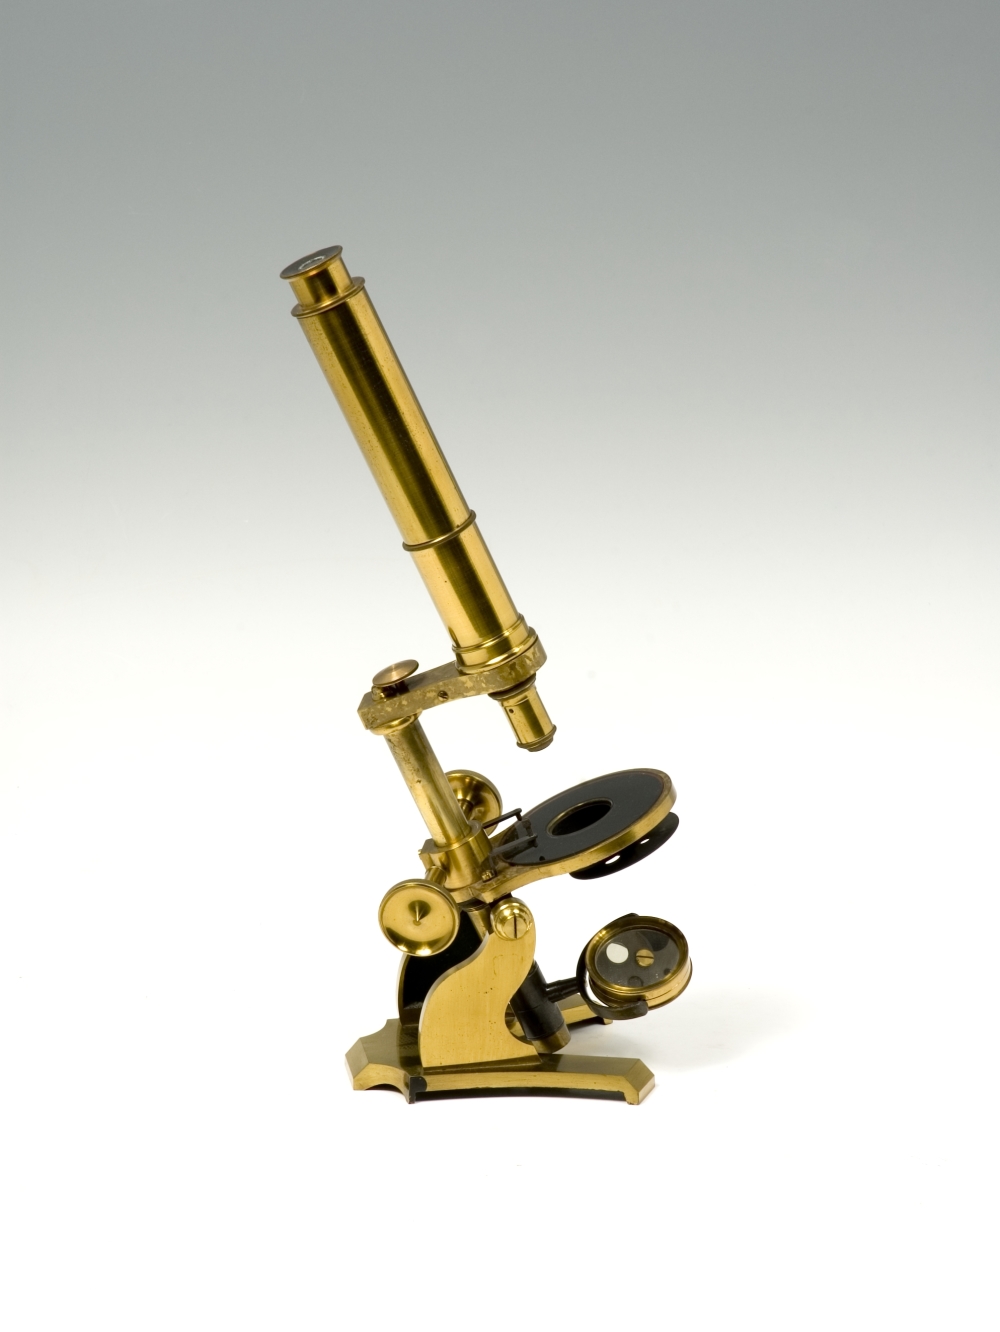 preview image for Society of Arts Microscope with Accessories and Case.